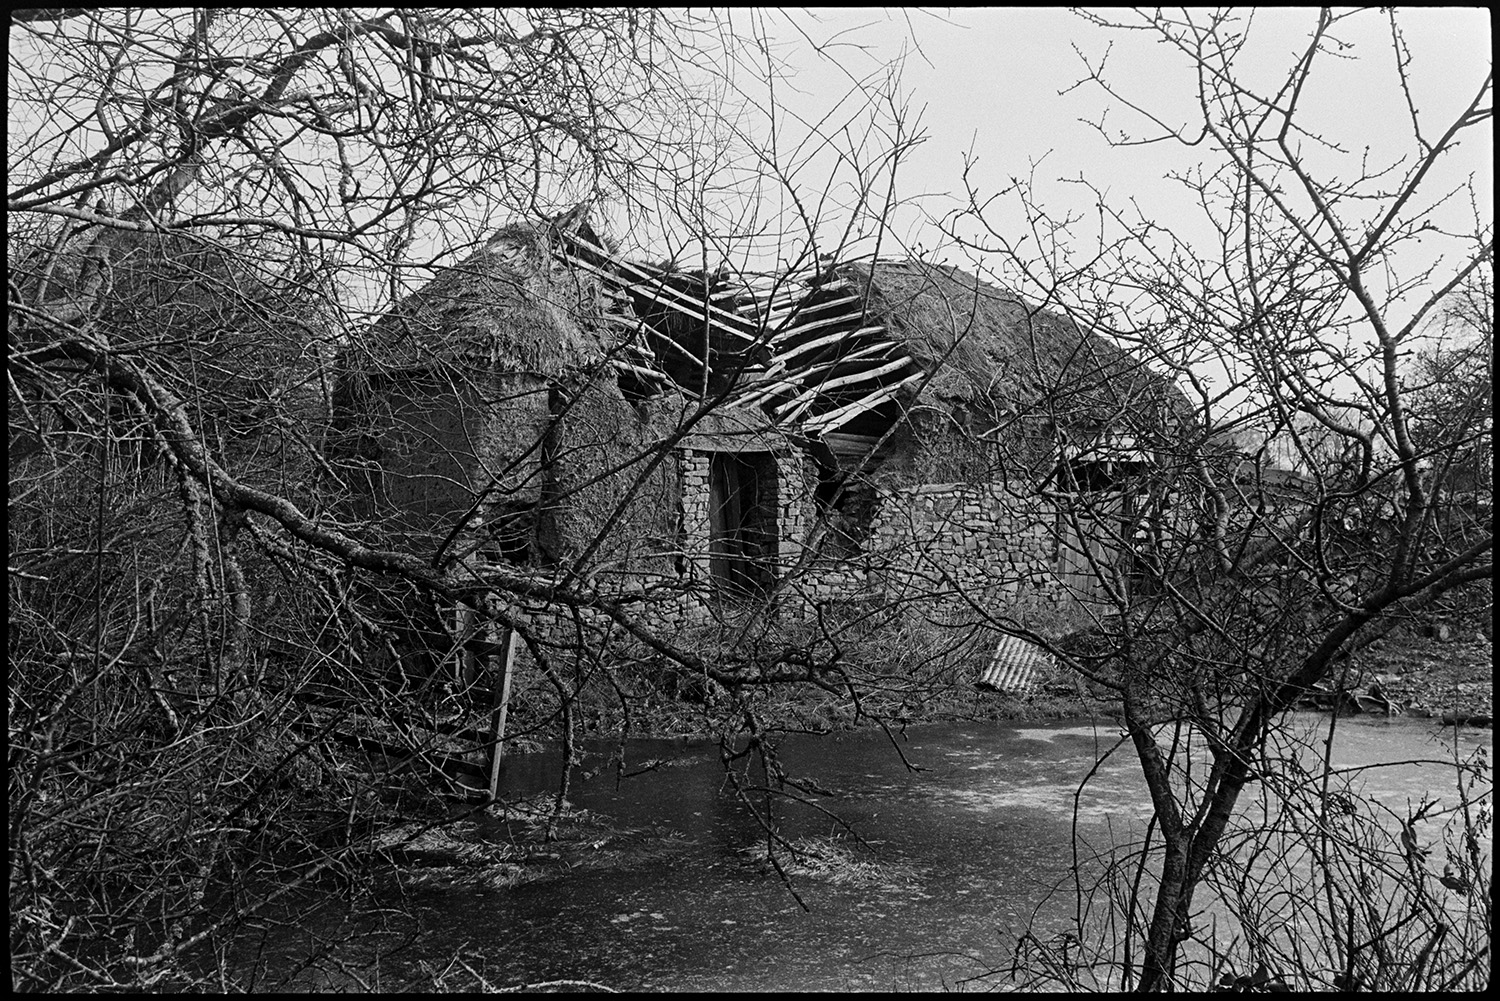 Ruined cob and thatch barns, flooded stream. 
[A collapsing cob, stone and thatched barn by a flooded stream in a field at Middle Week, Iddesleigh. The roof timbers of the barn are exposed.]